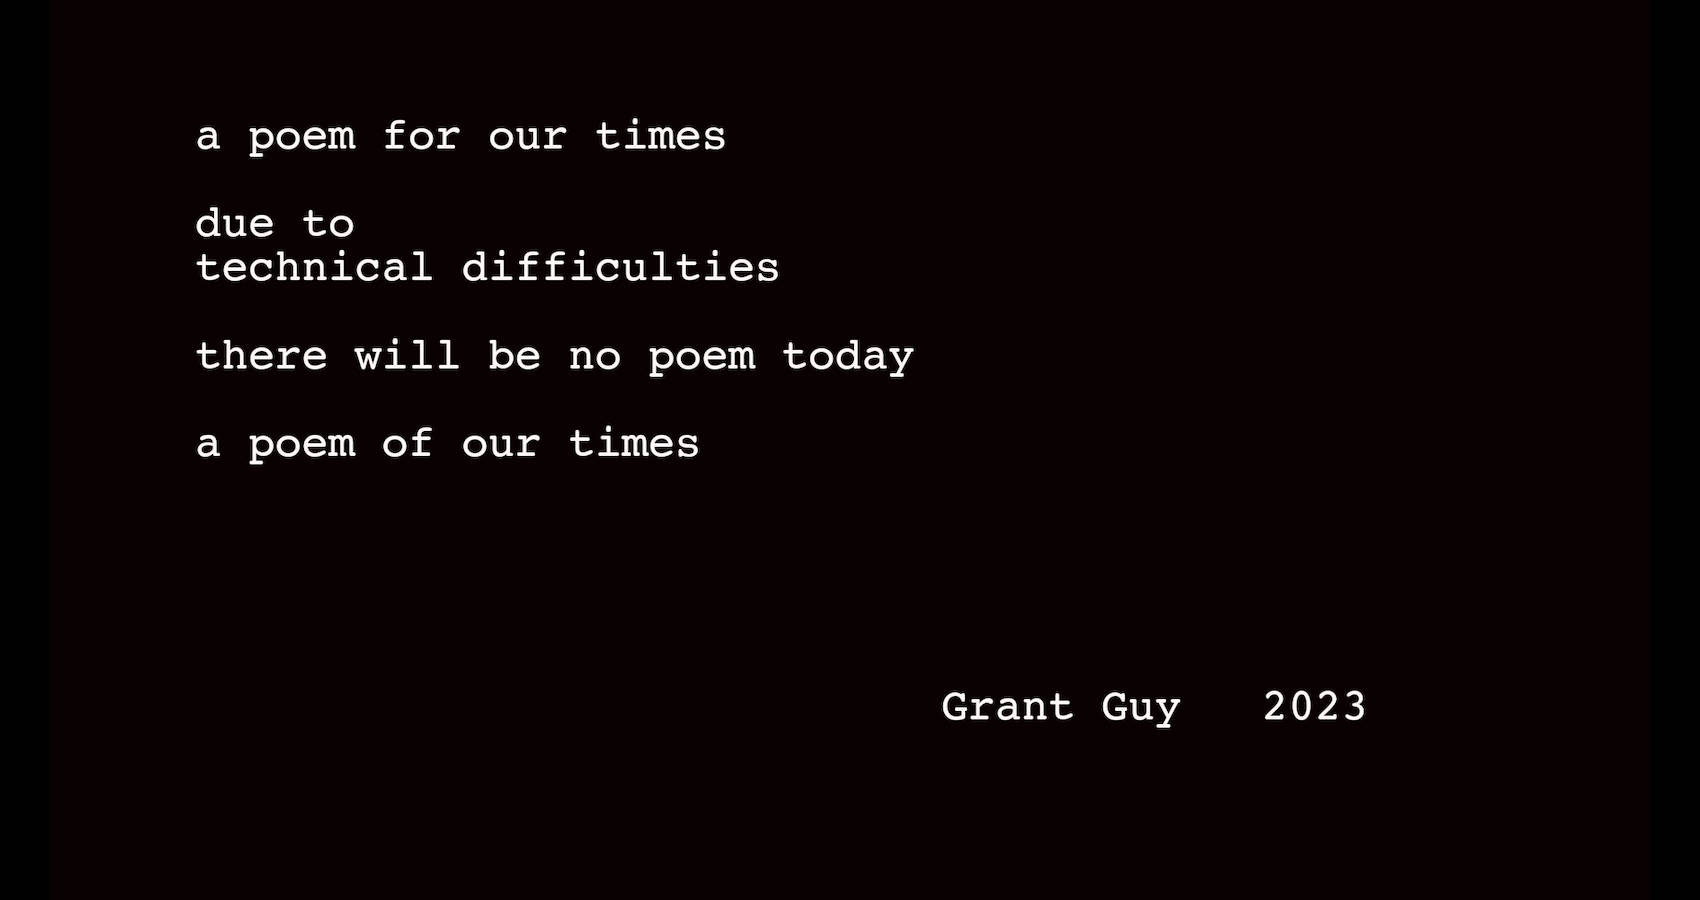 A Poem For Our Times, poetry by Grant Guy at Spillwords.com